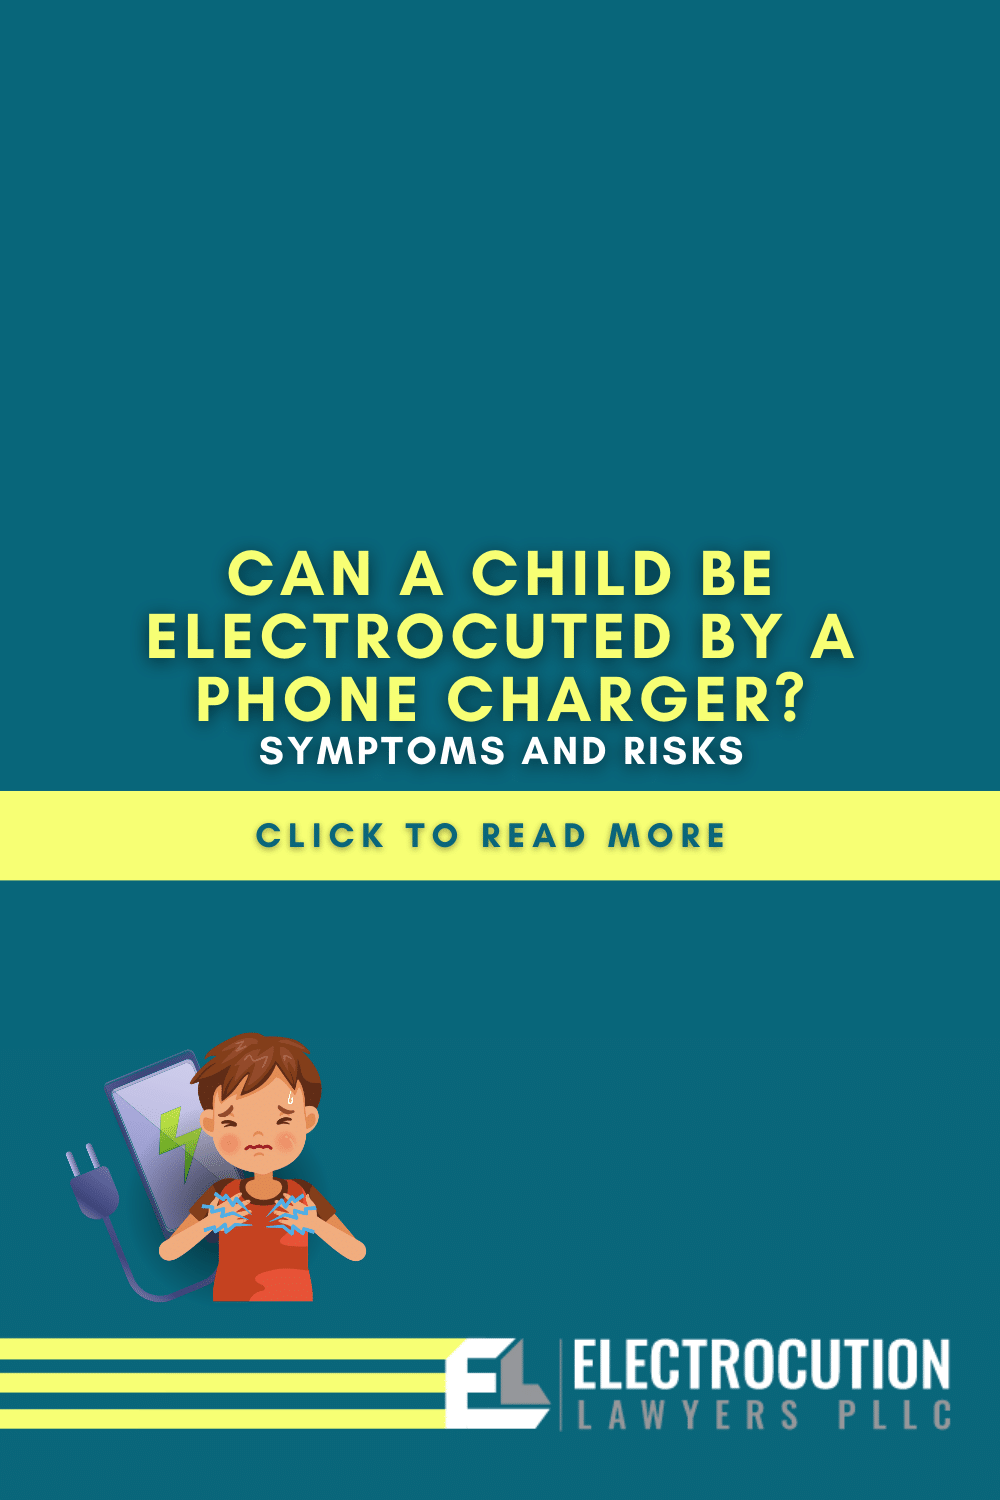 Can A Child Be Electrocuted By A Phone Charger?